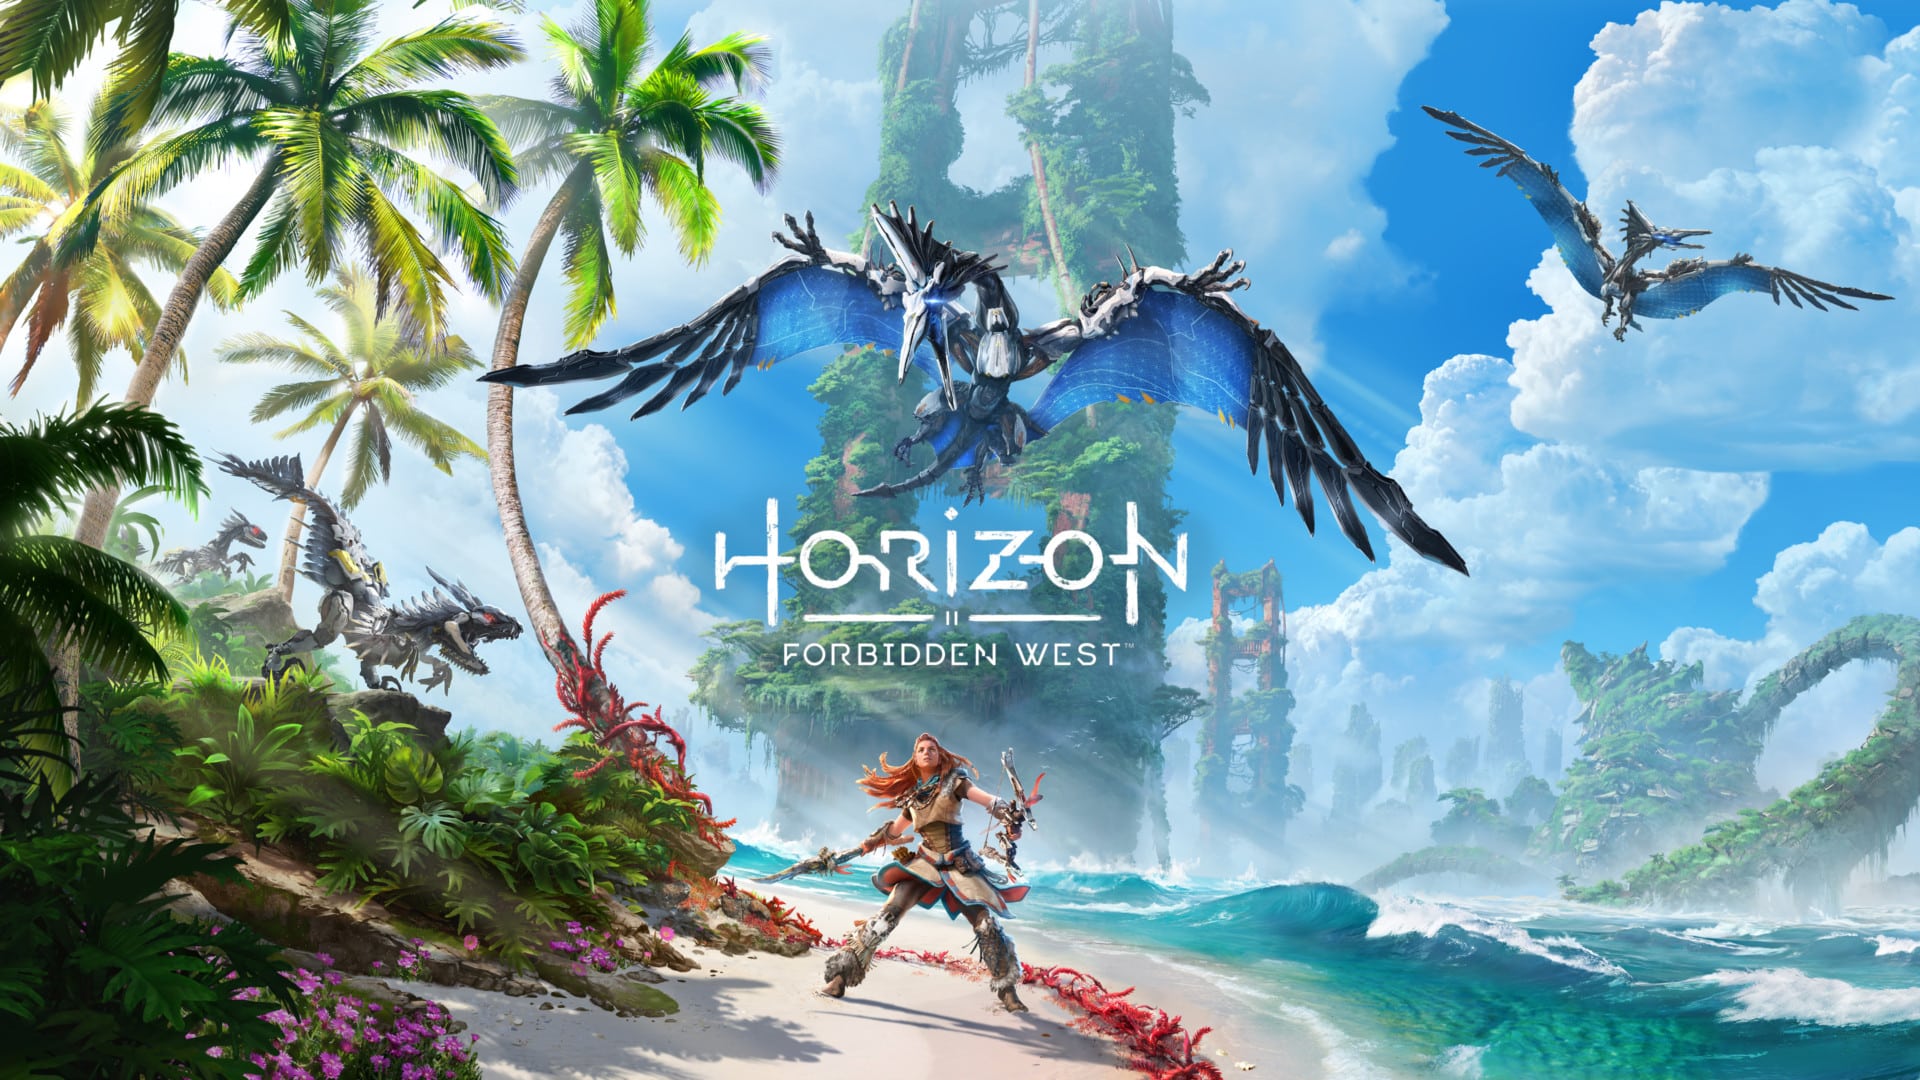 The Day One Patch for Horizon Zero Dawn Forbidden West Day